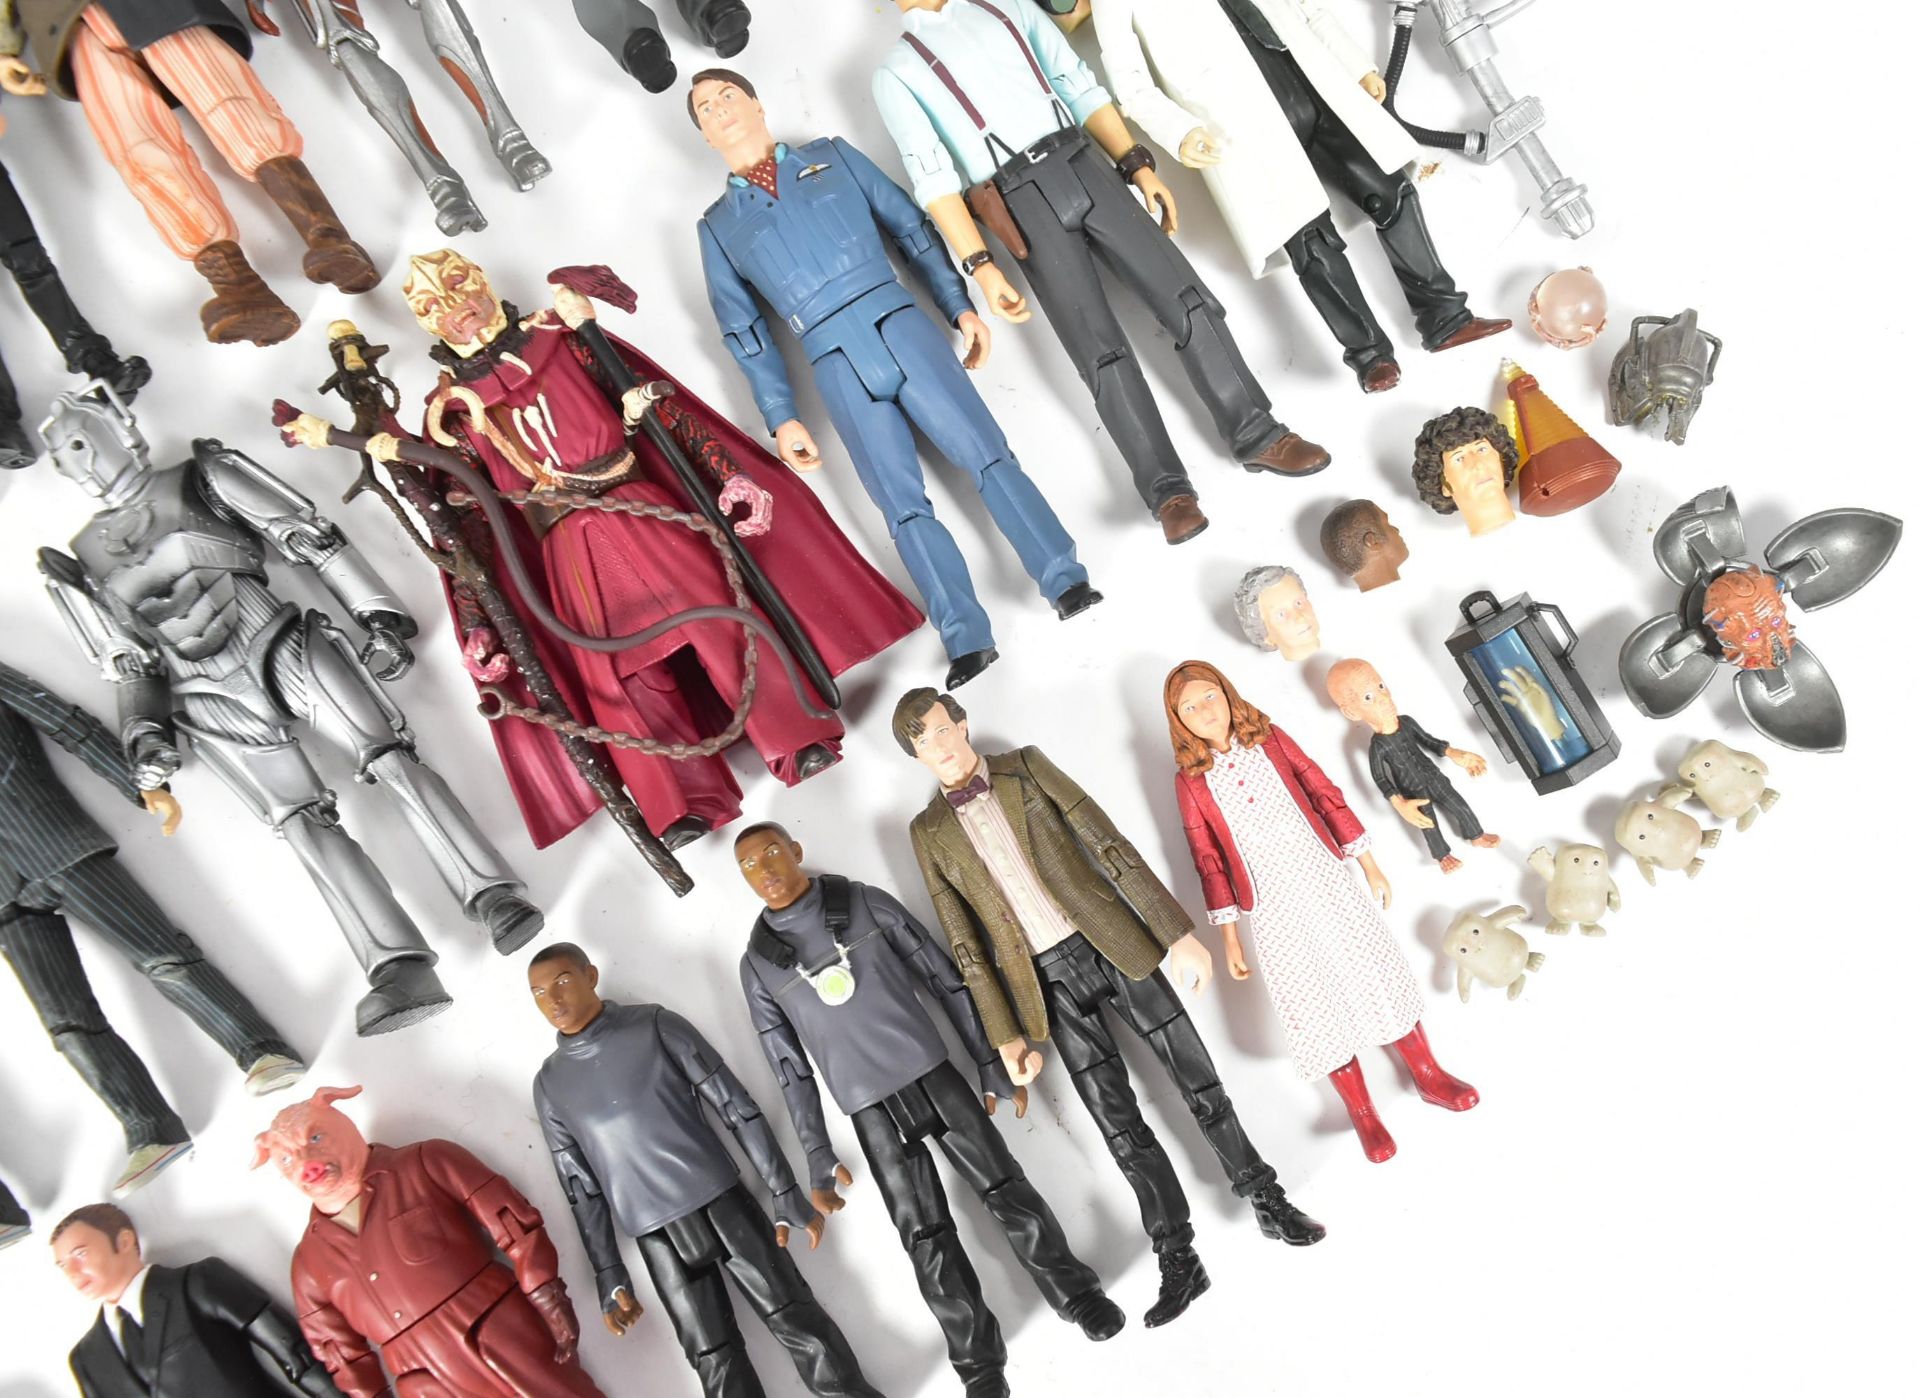 DOCTOR WHO - CHARACTER OPTIONS - ACTION FIGURES - Image 10 of 10